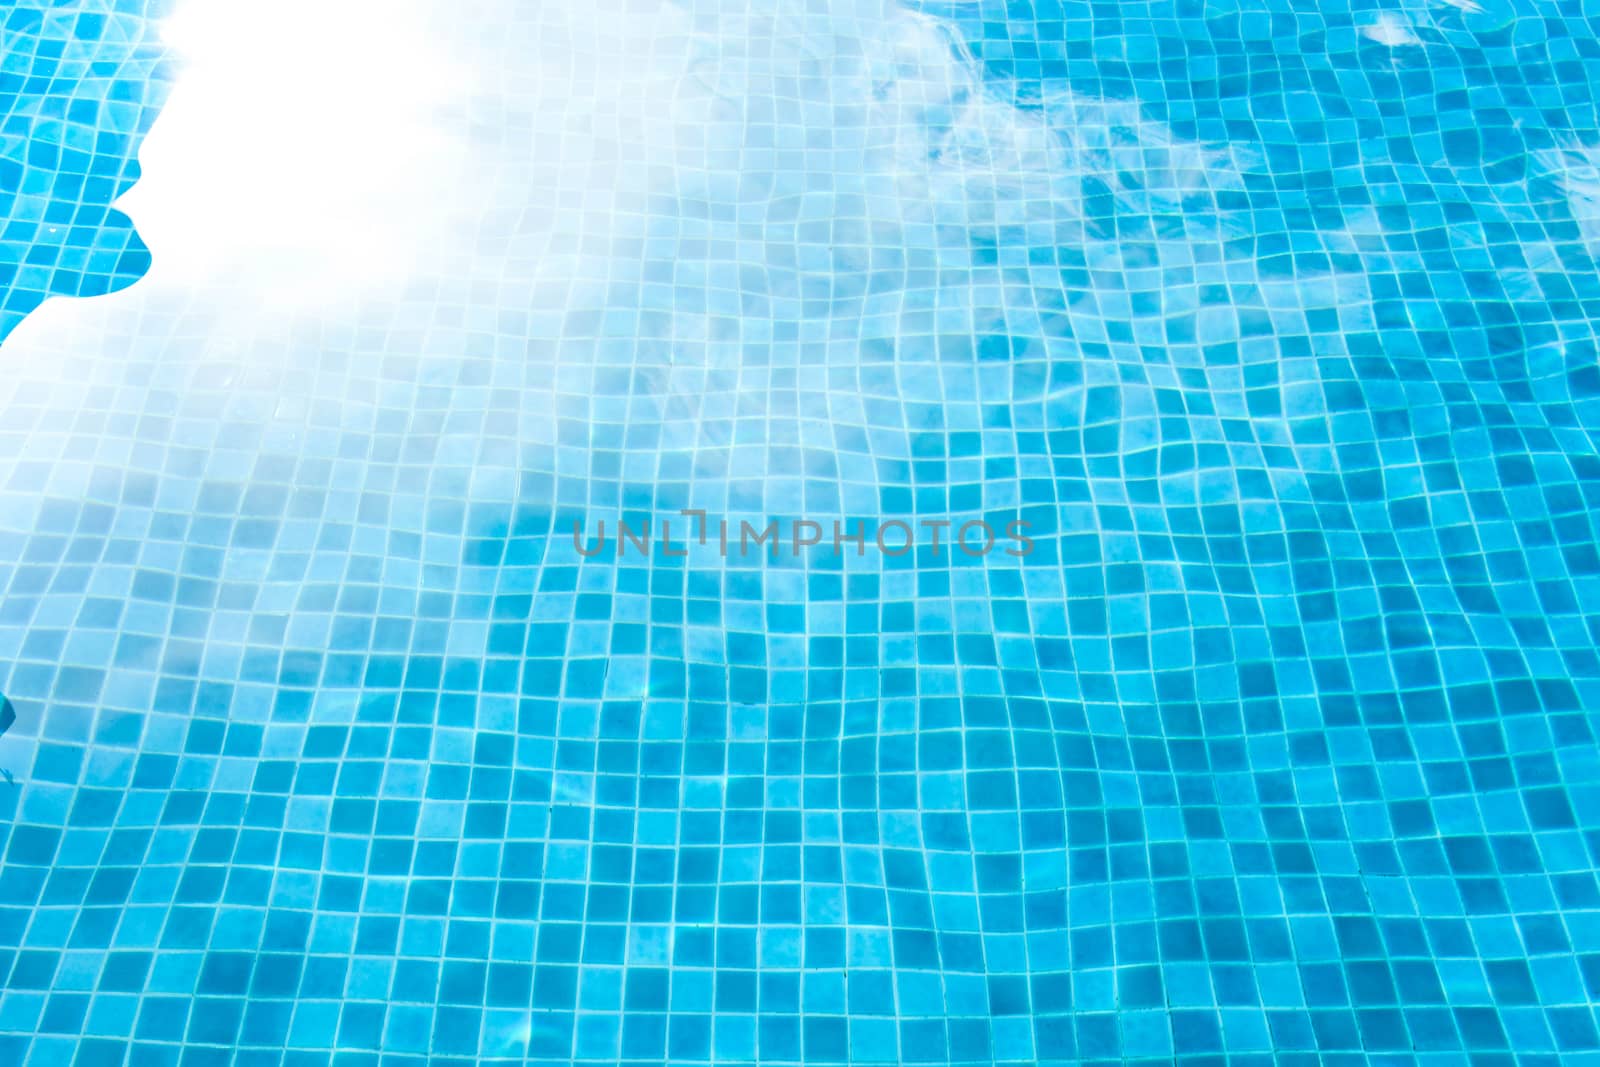 Blue tiled swimming pool background. View from eye by nopparats